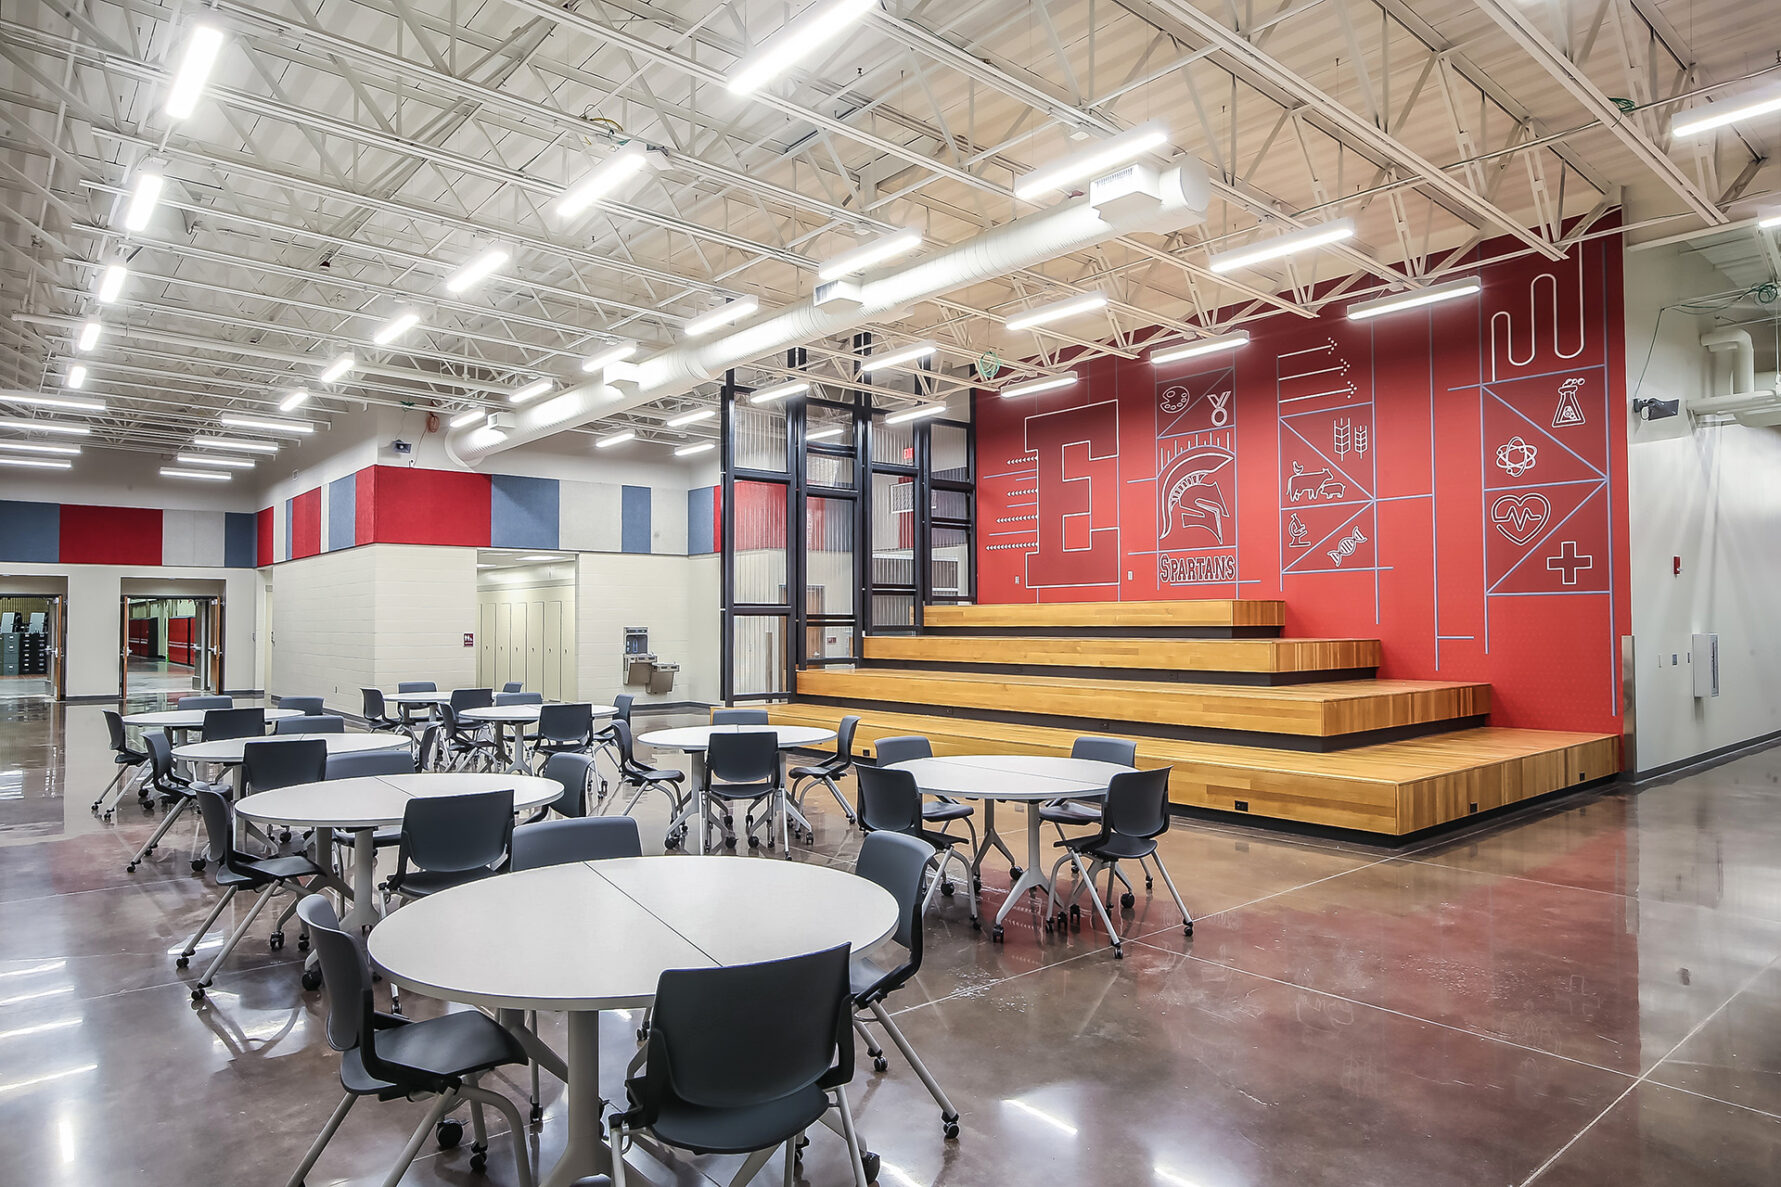 A commons area at Emporia High School, a McCownGordon project.